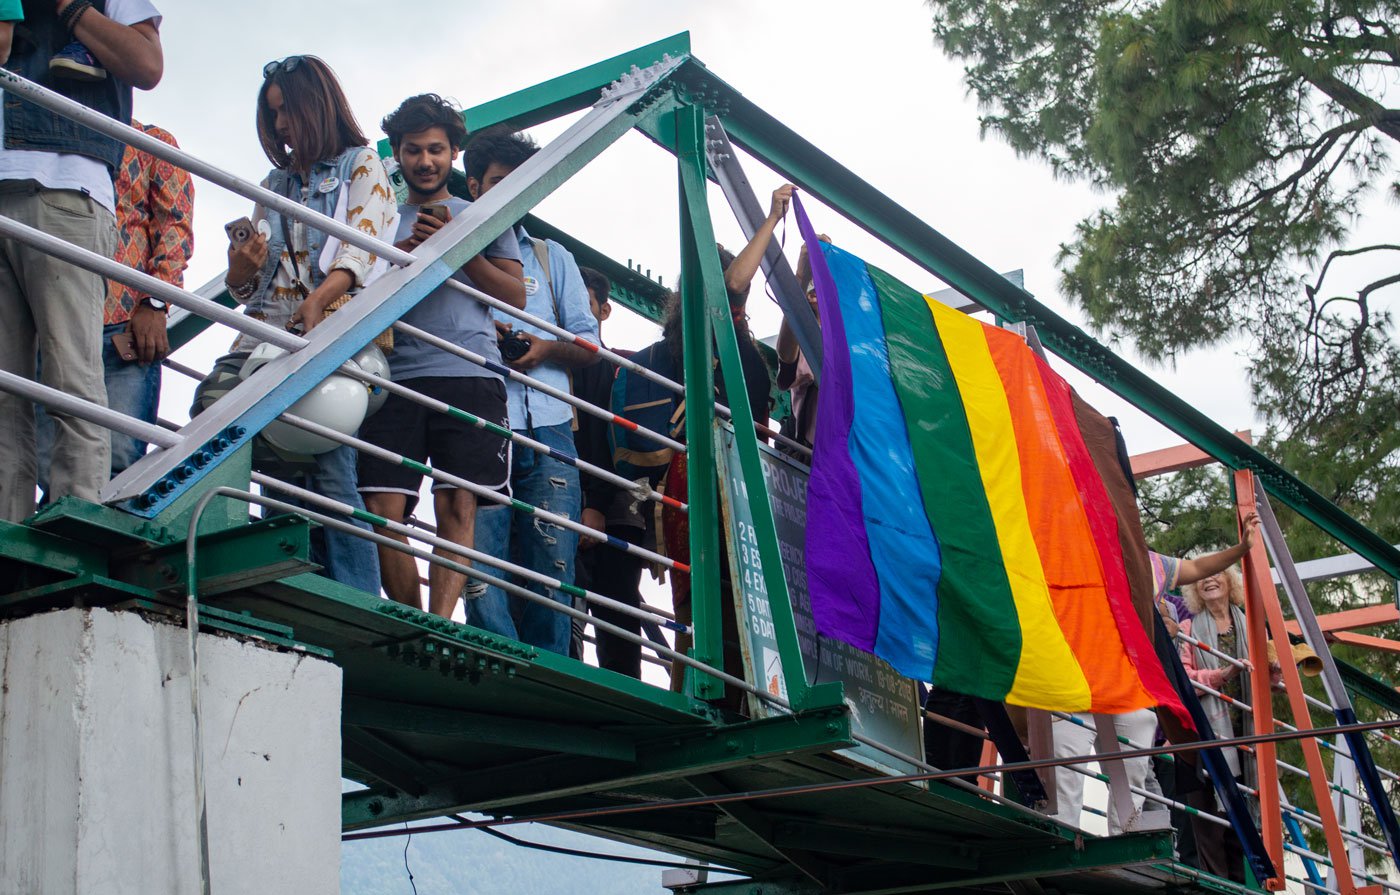 A pride flag hangs from the bridge during the march